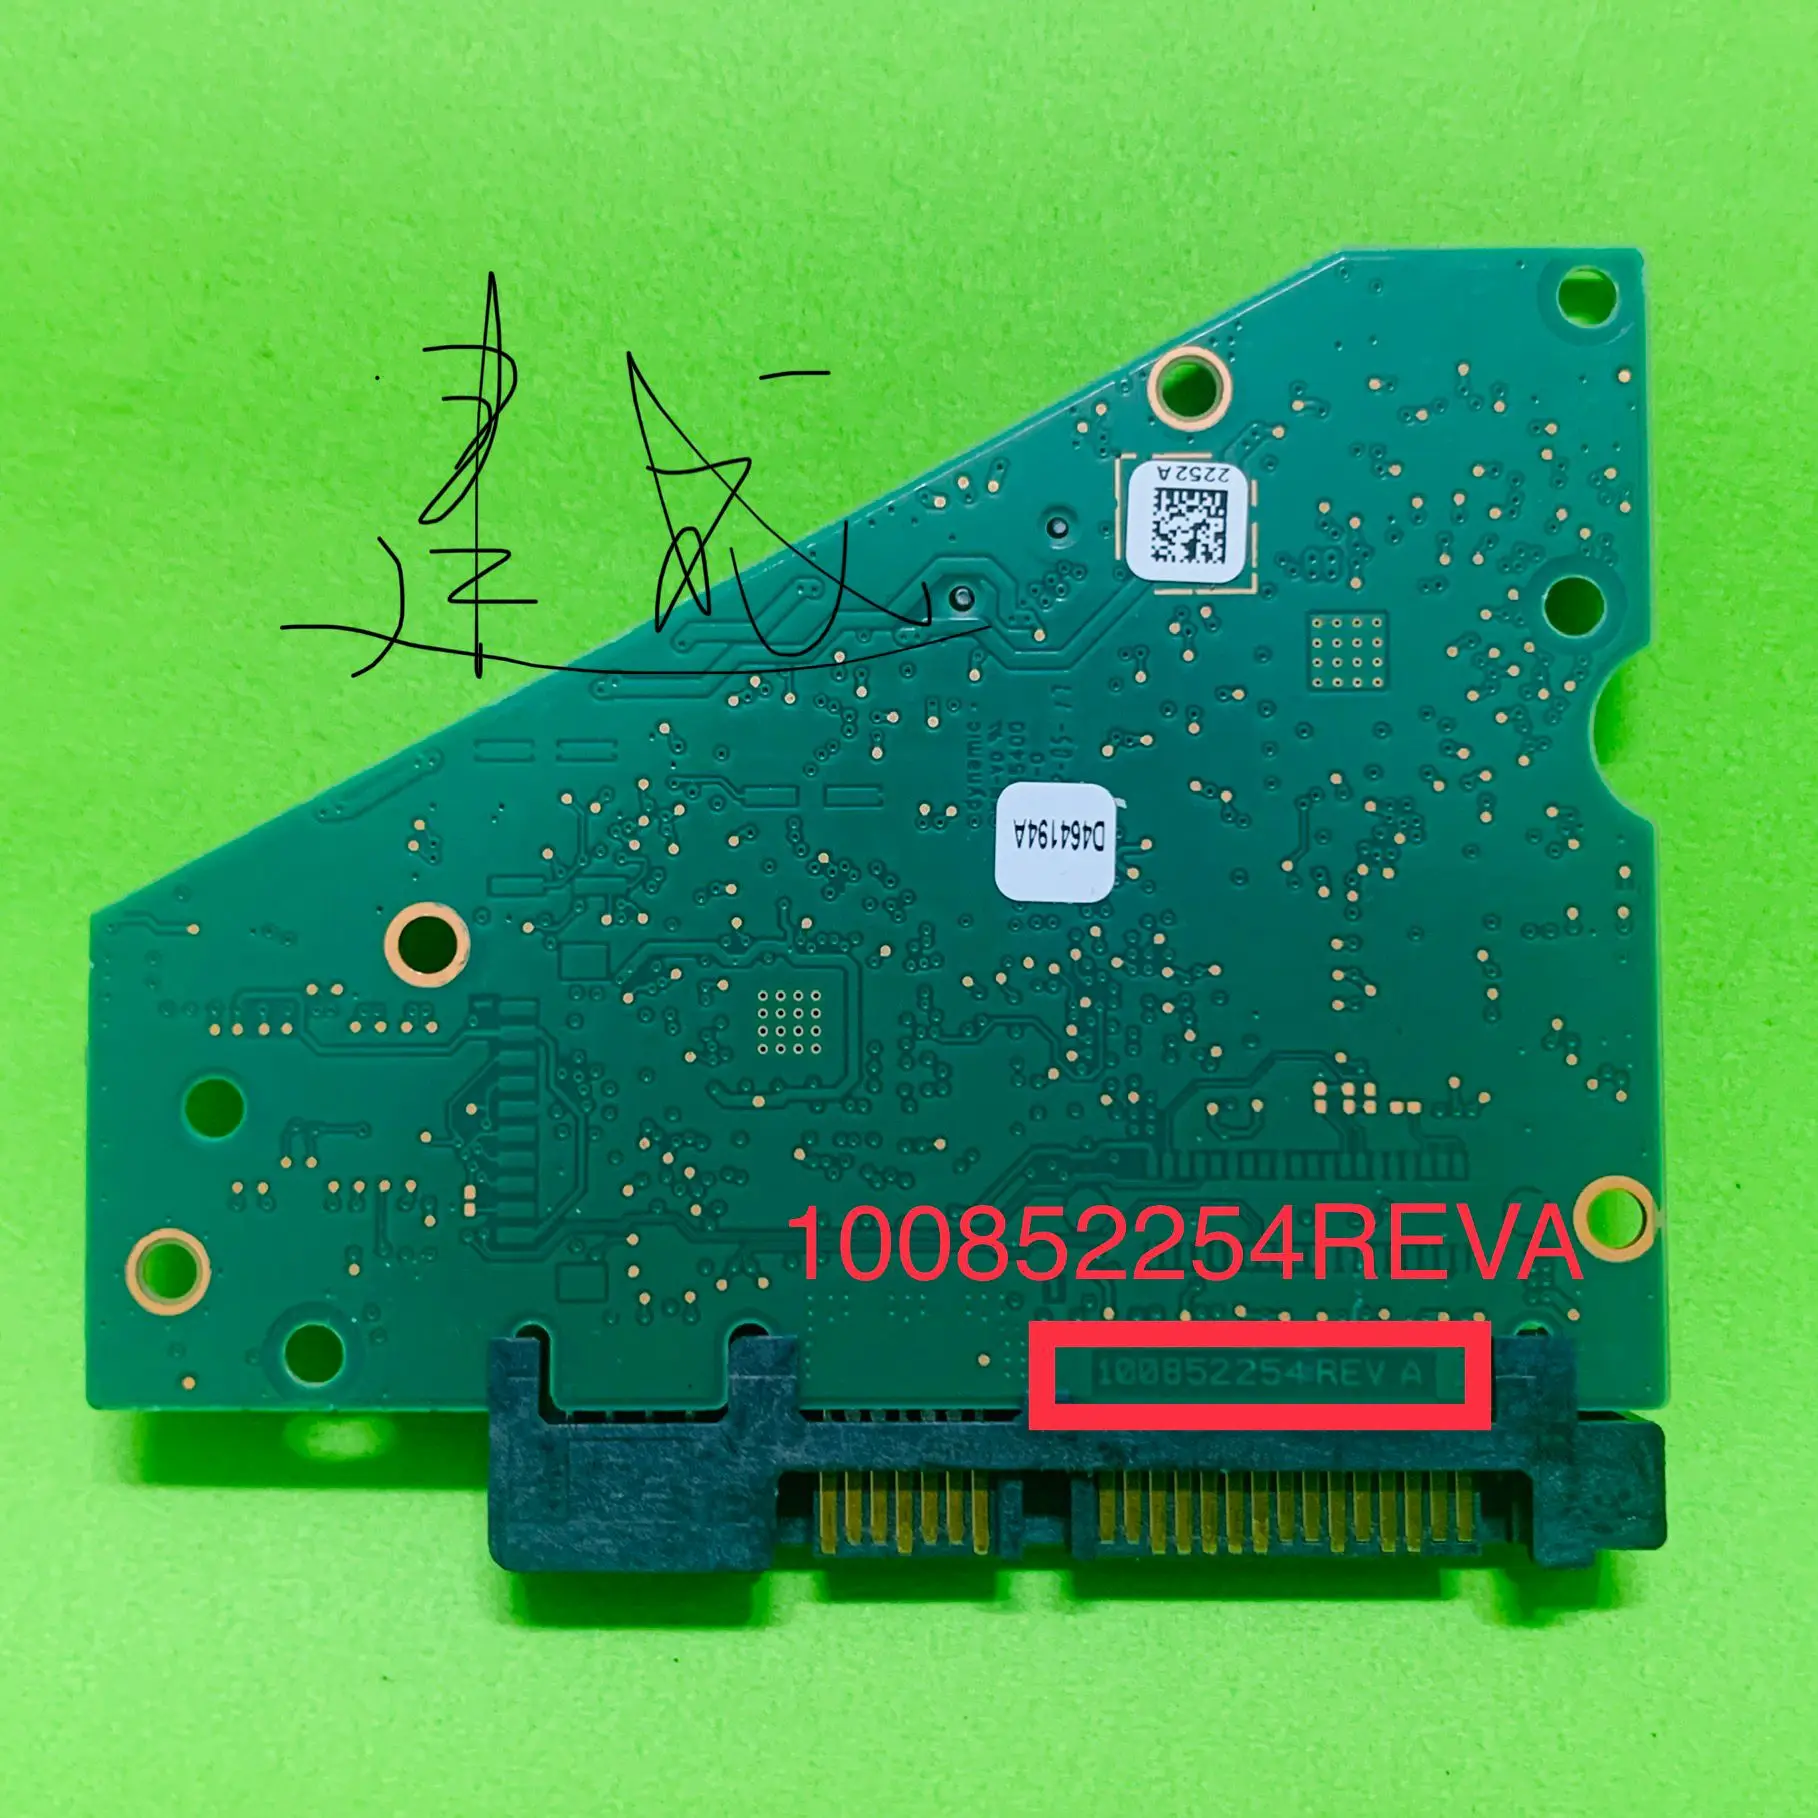 

HDD 100852254 REV A Seagate 3.5 hard disk PCB 2252A data recovery